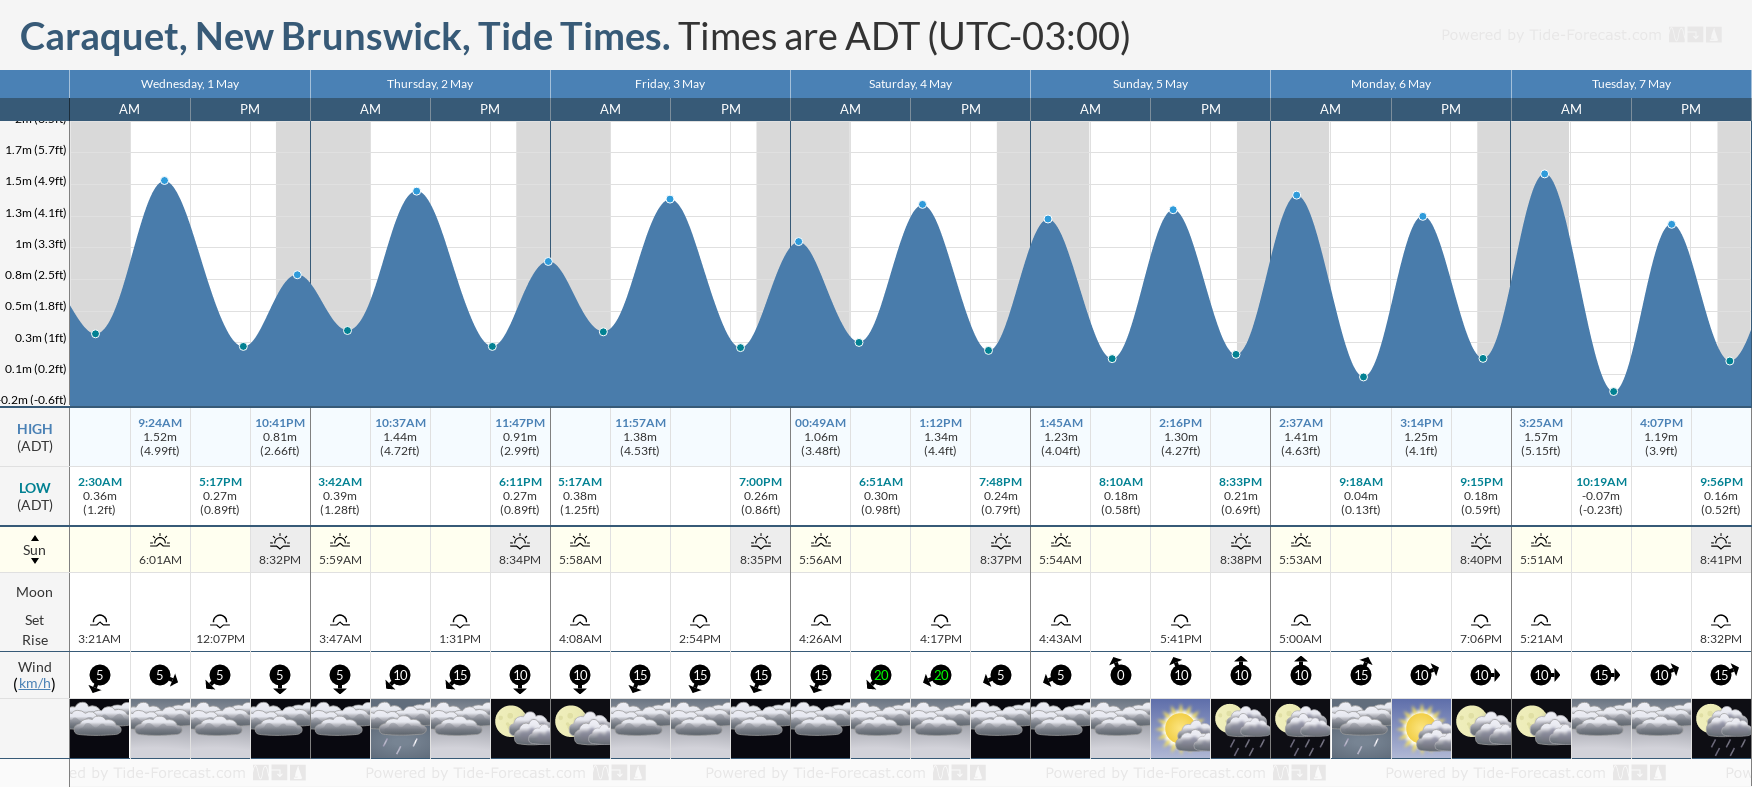 Caraquet, New Brunswick Tide Chart including high and low tide tide times for the next 7 days